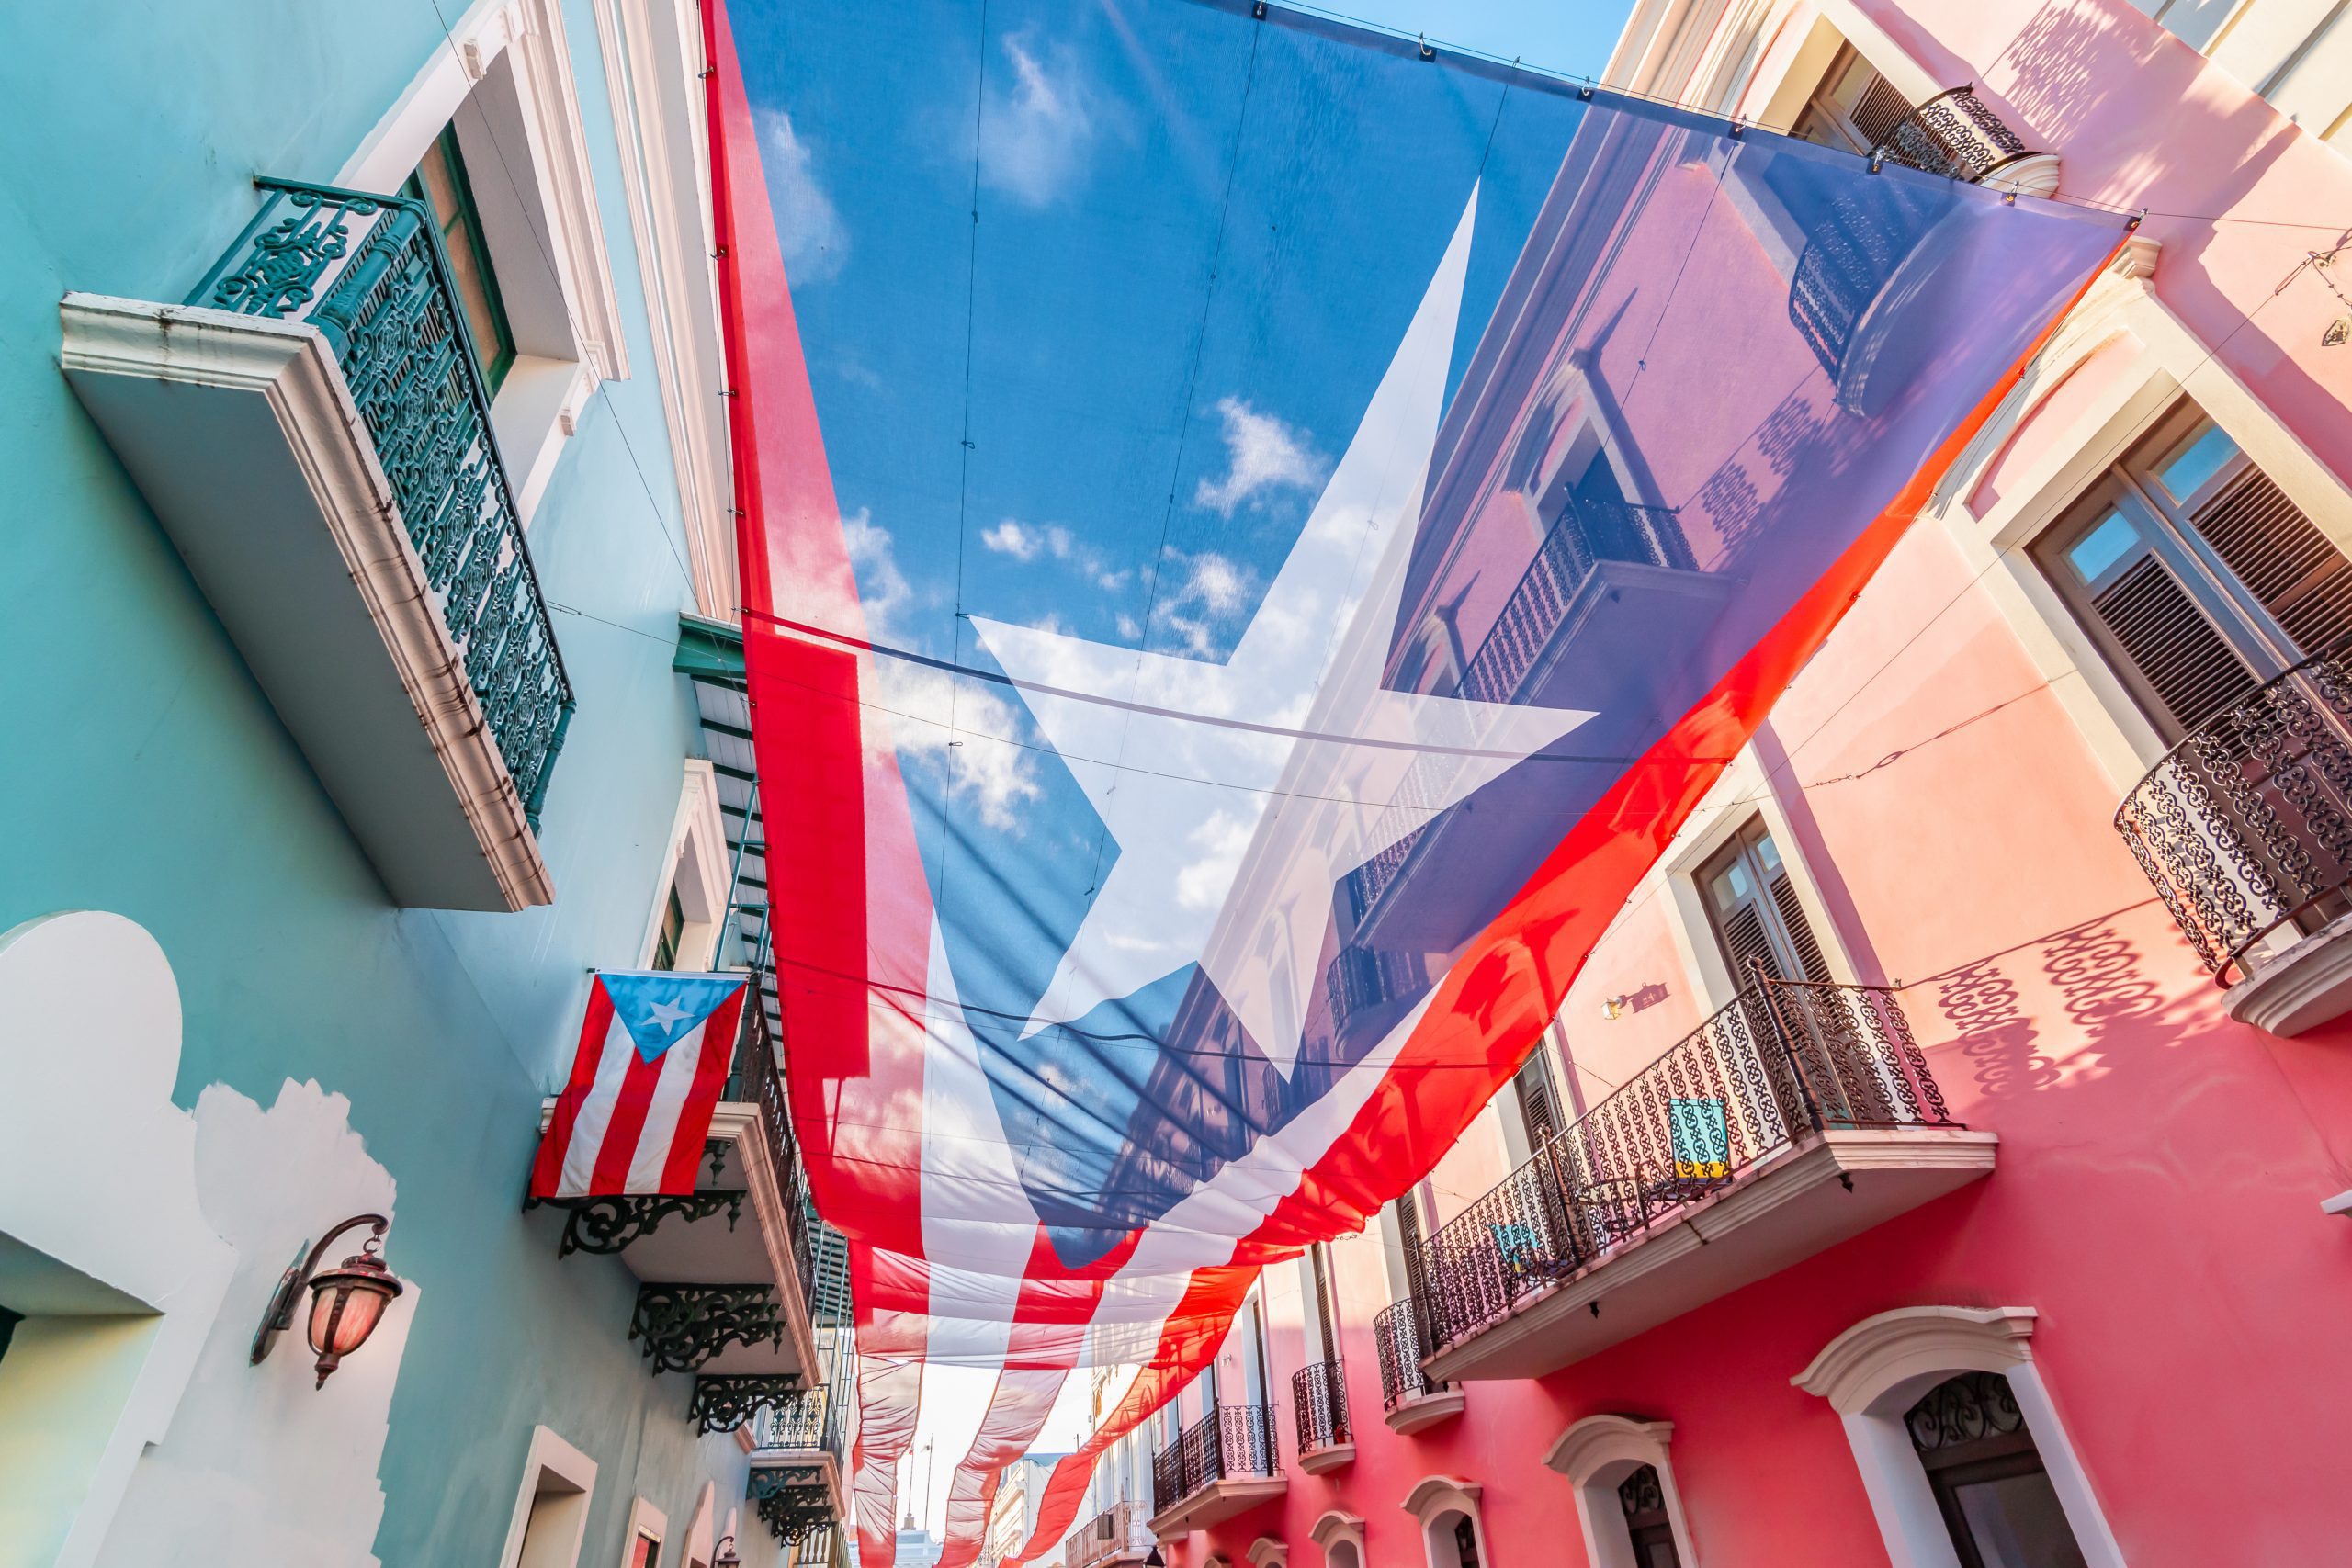 Colorful image of city centre of San Juan with large Puerto Rican flag above the street. Blue and pink buildings in the street. Sunny day. Red and white stripes, white star and blue colored national flag of Puerto Rico.